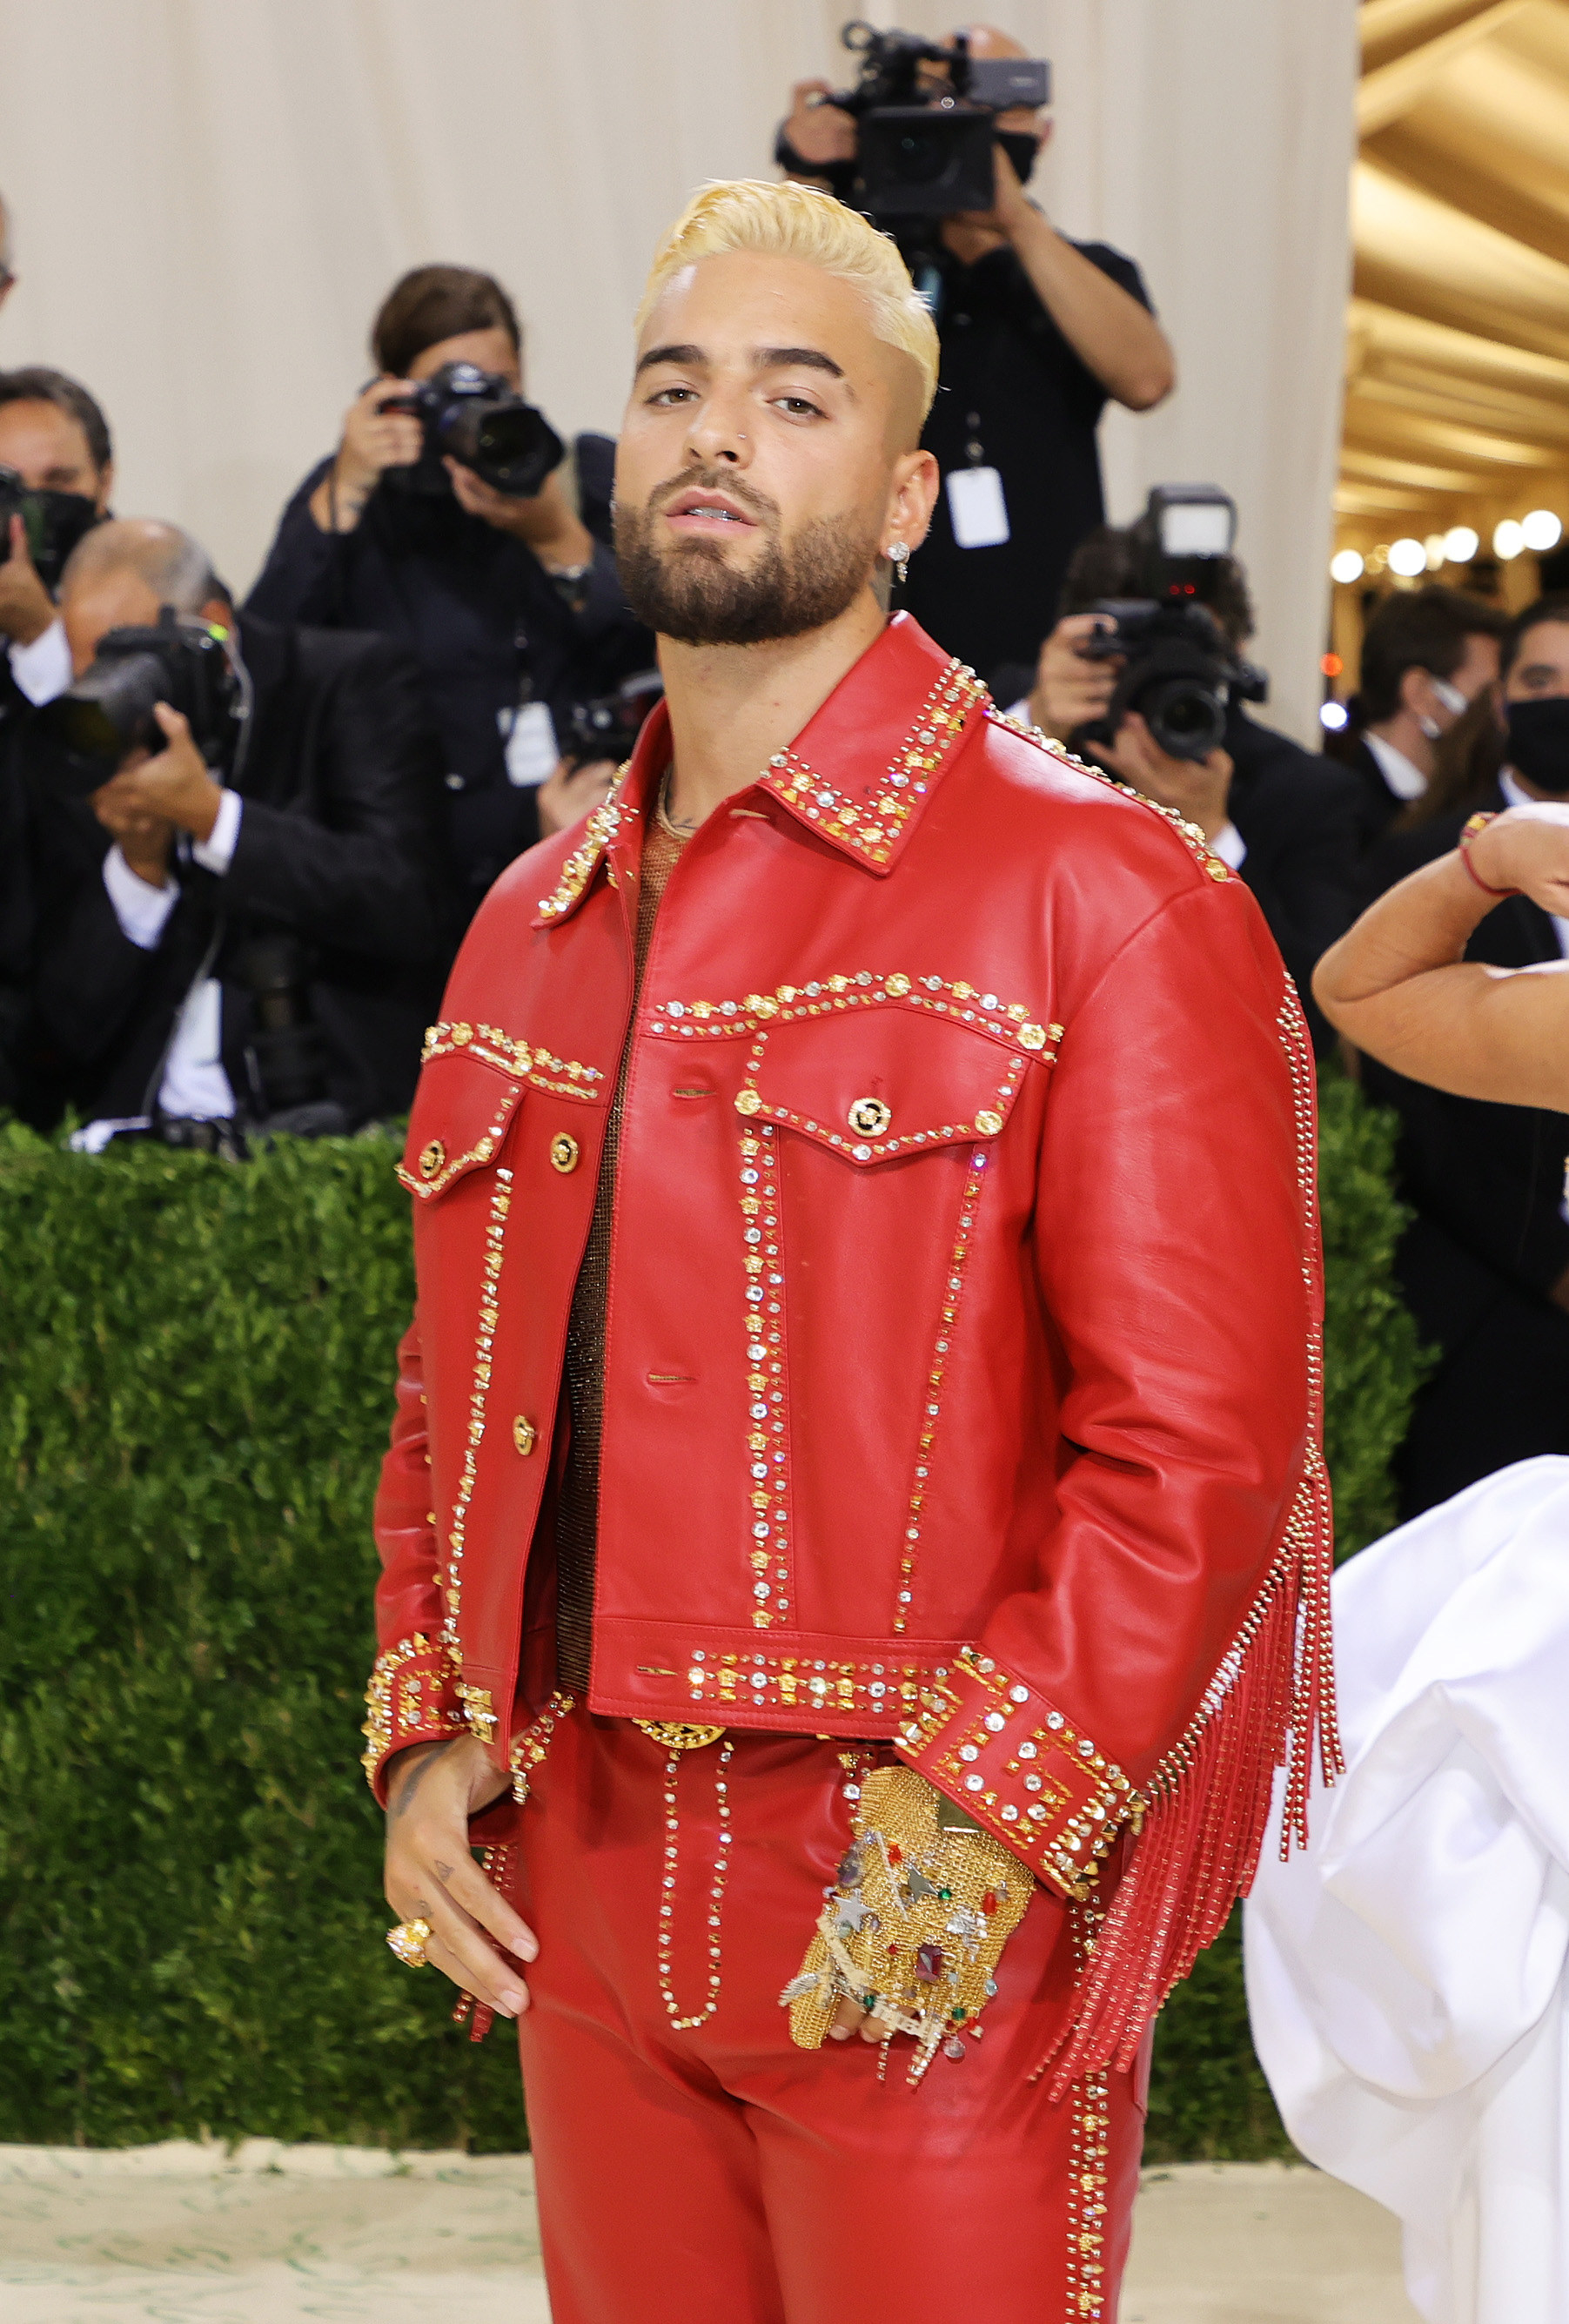 Maluma is seen at The 2021 Met Gala in a red leather Versace outfit